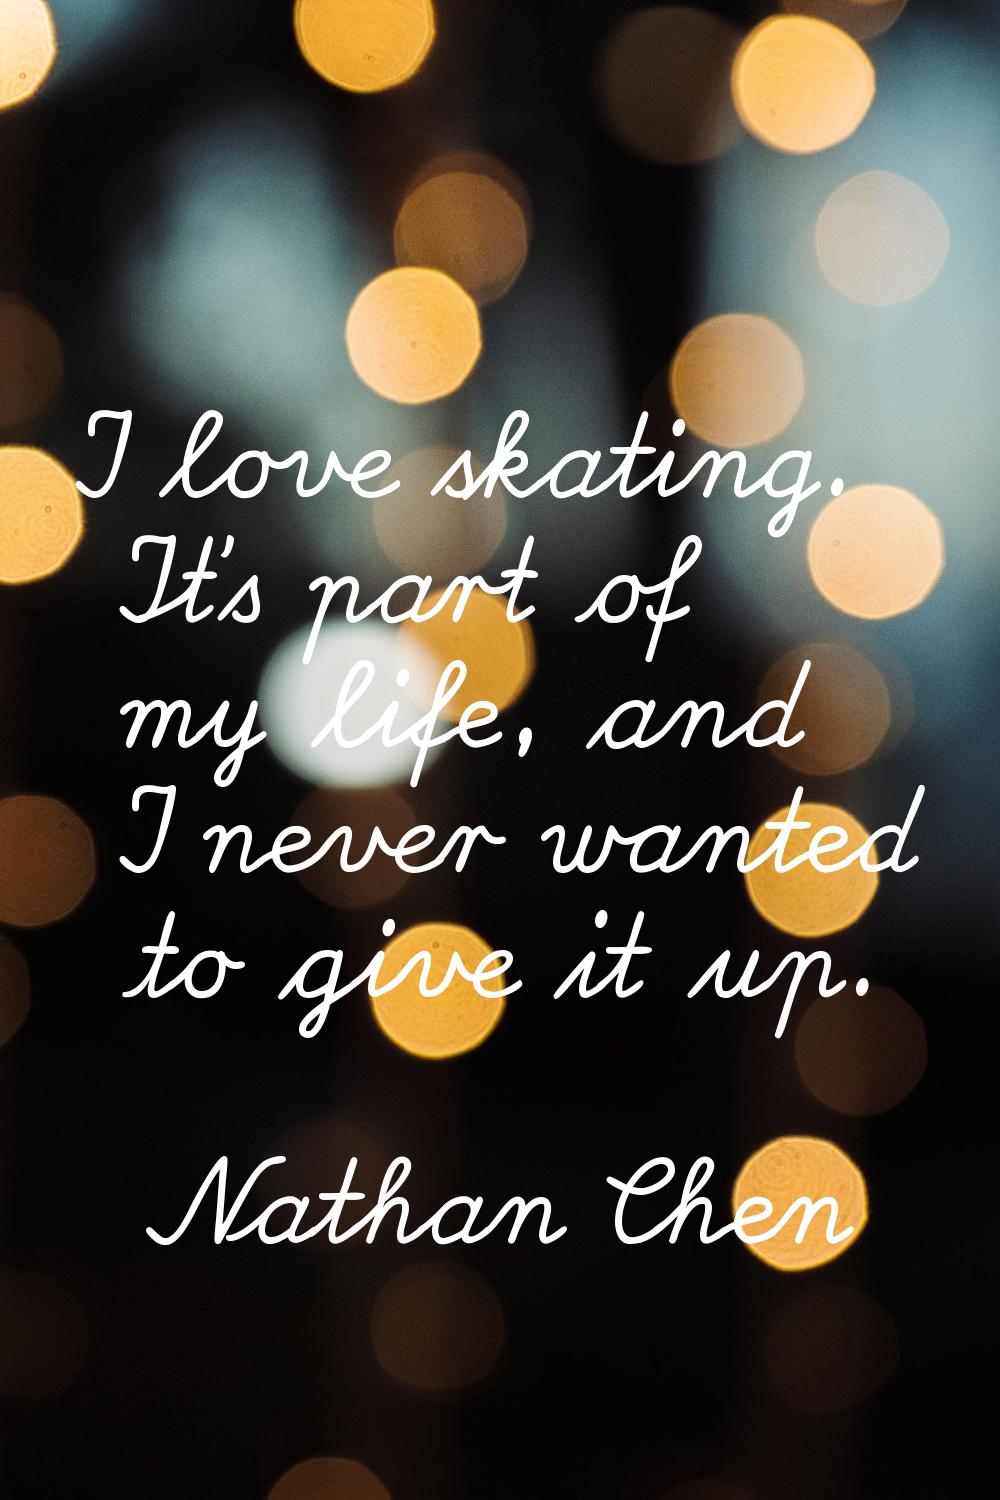 I love skating. It's part of my life, and I never wanted to give it up.